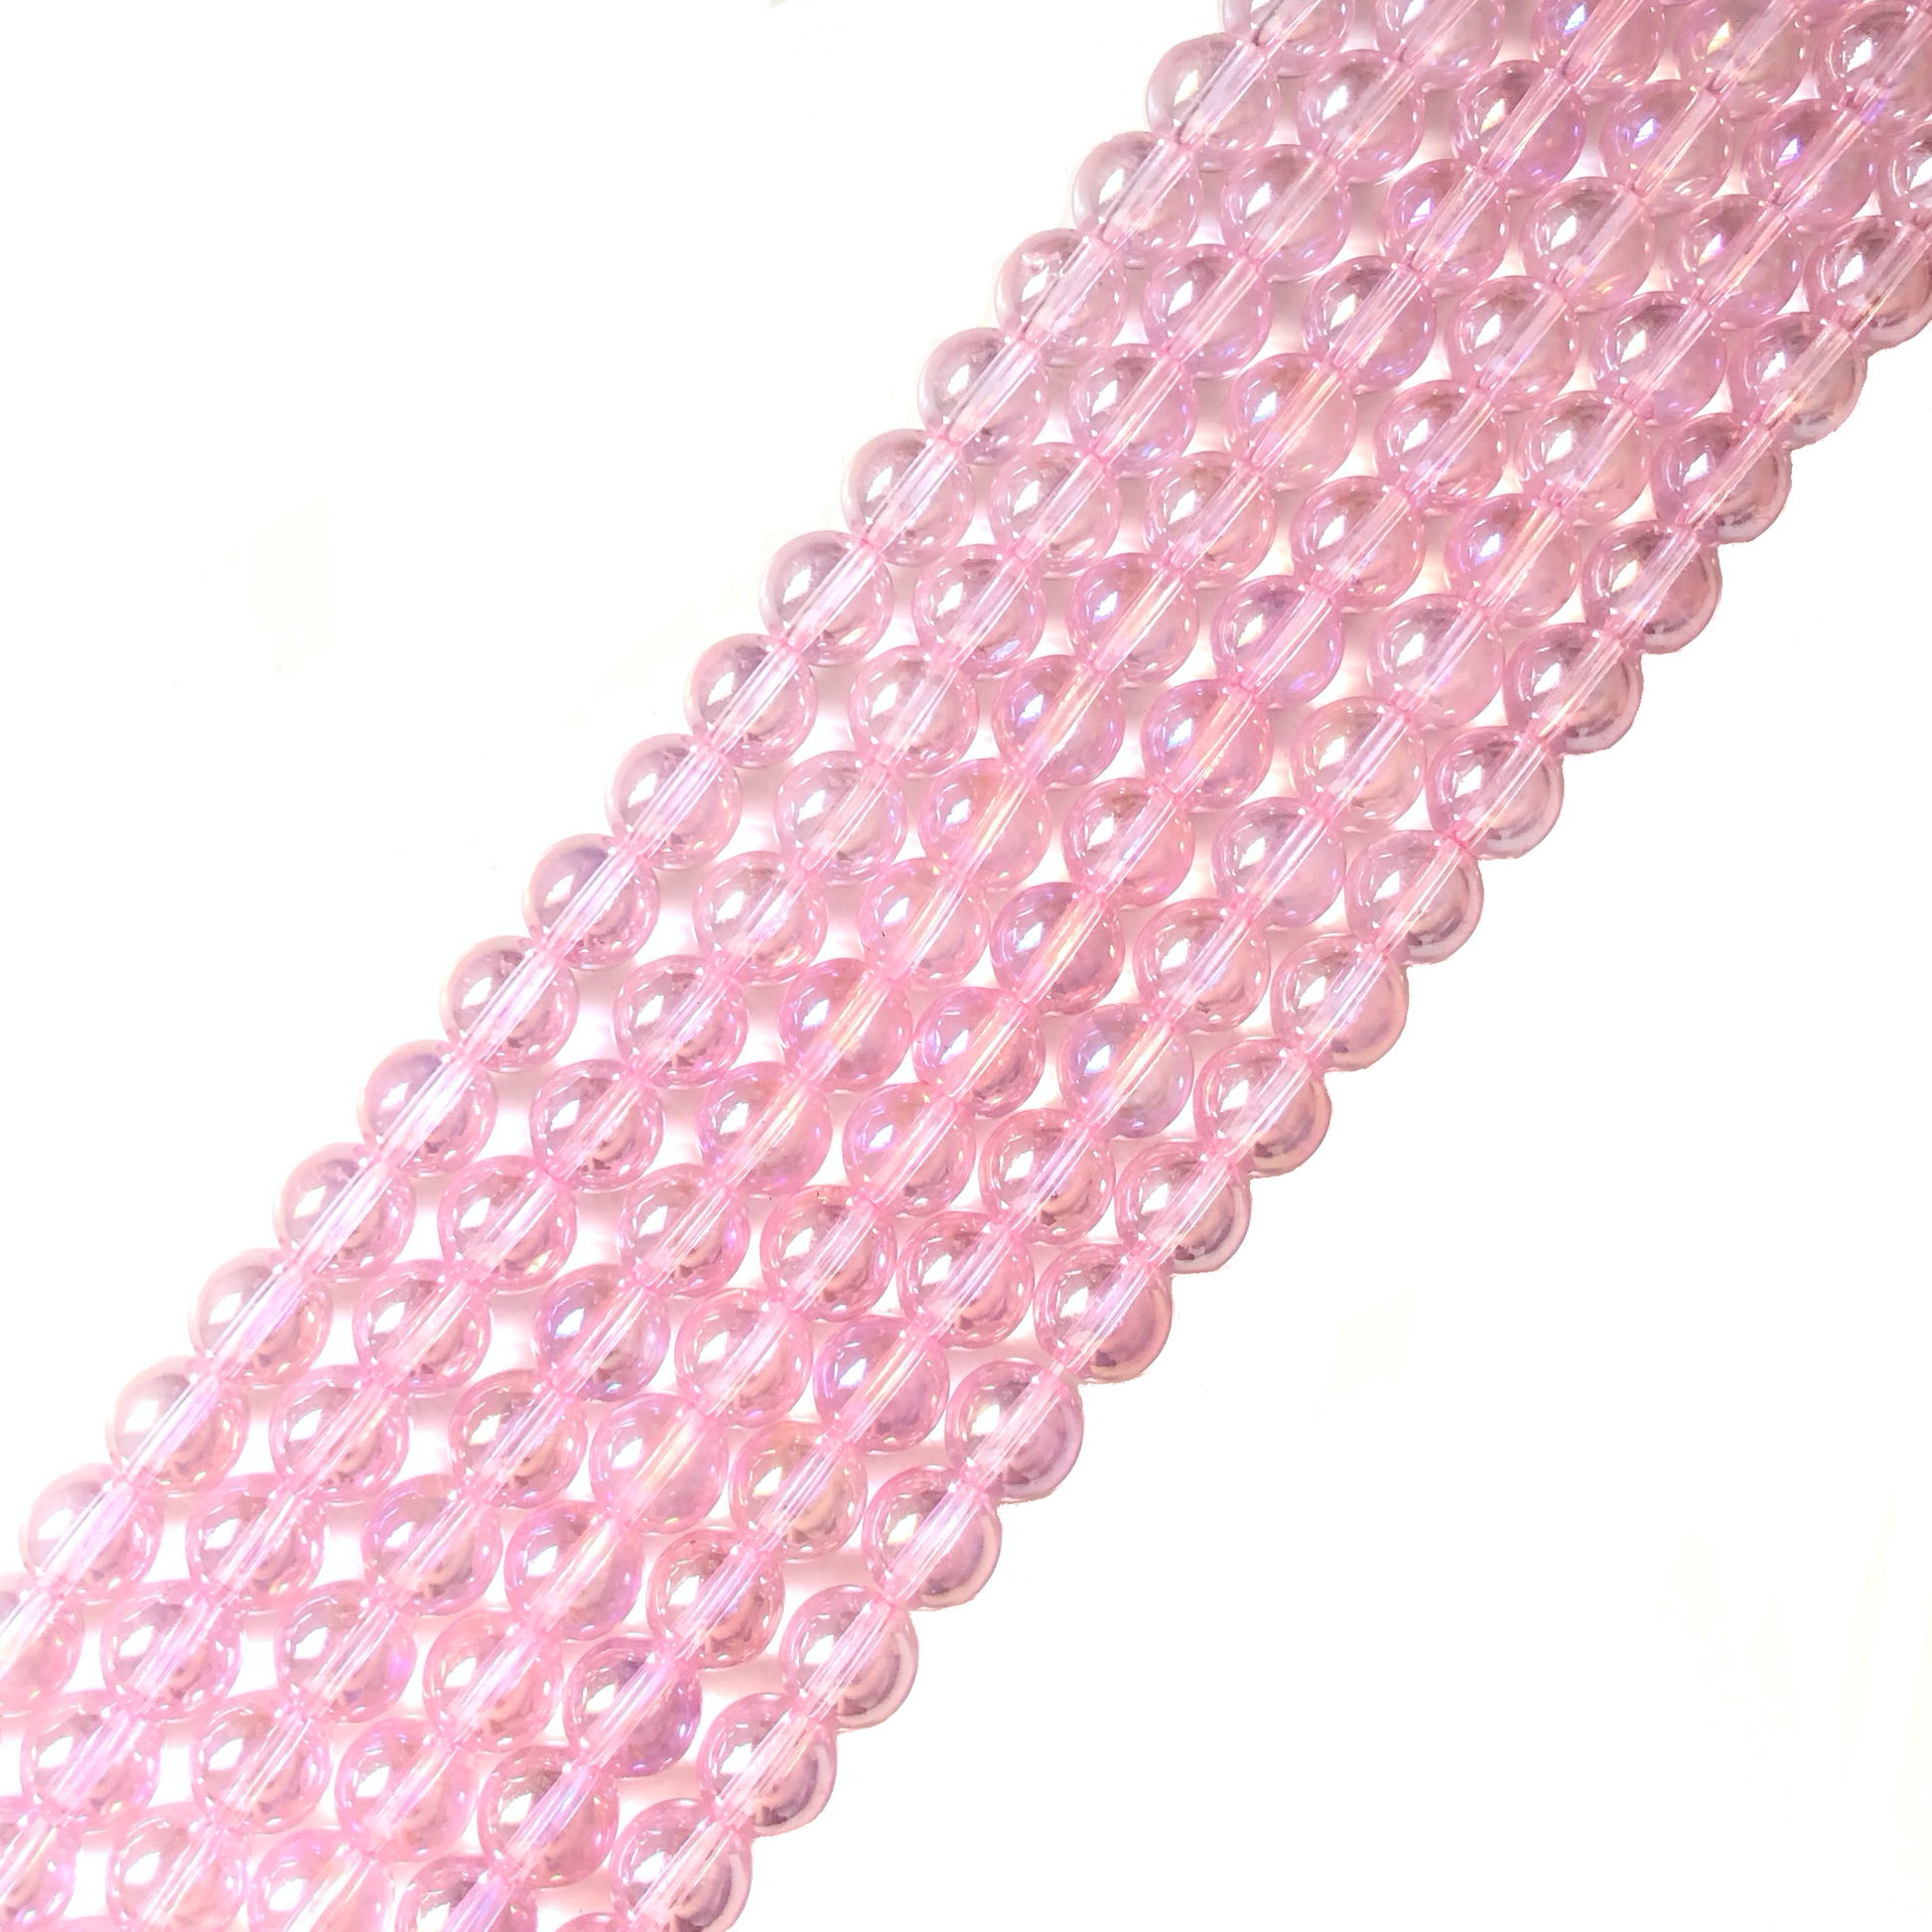 2 Strands/lot 10mm Pink Glass Round Beads Glass Beads Breast Cancer Awareness Round Glass Beads Charms Beads Beyond